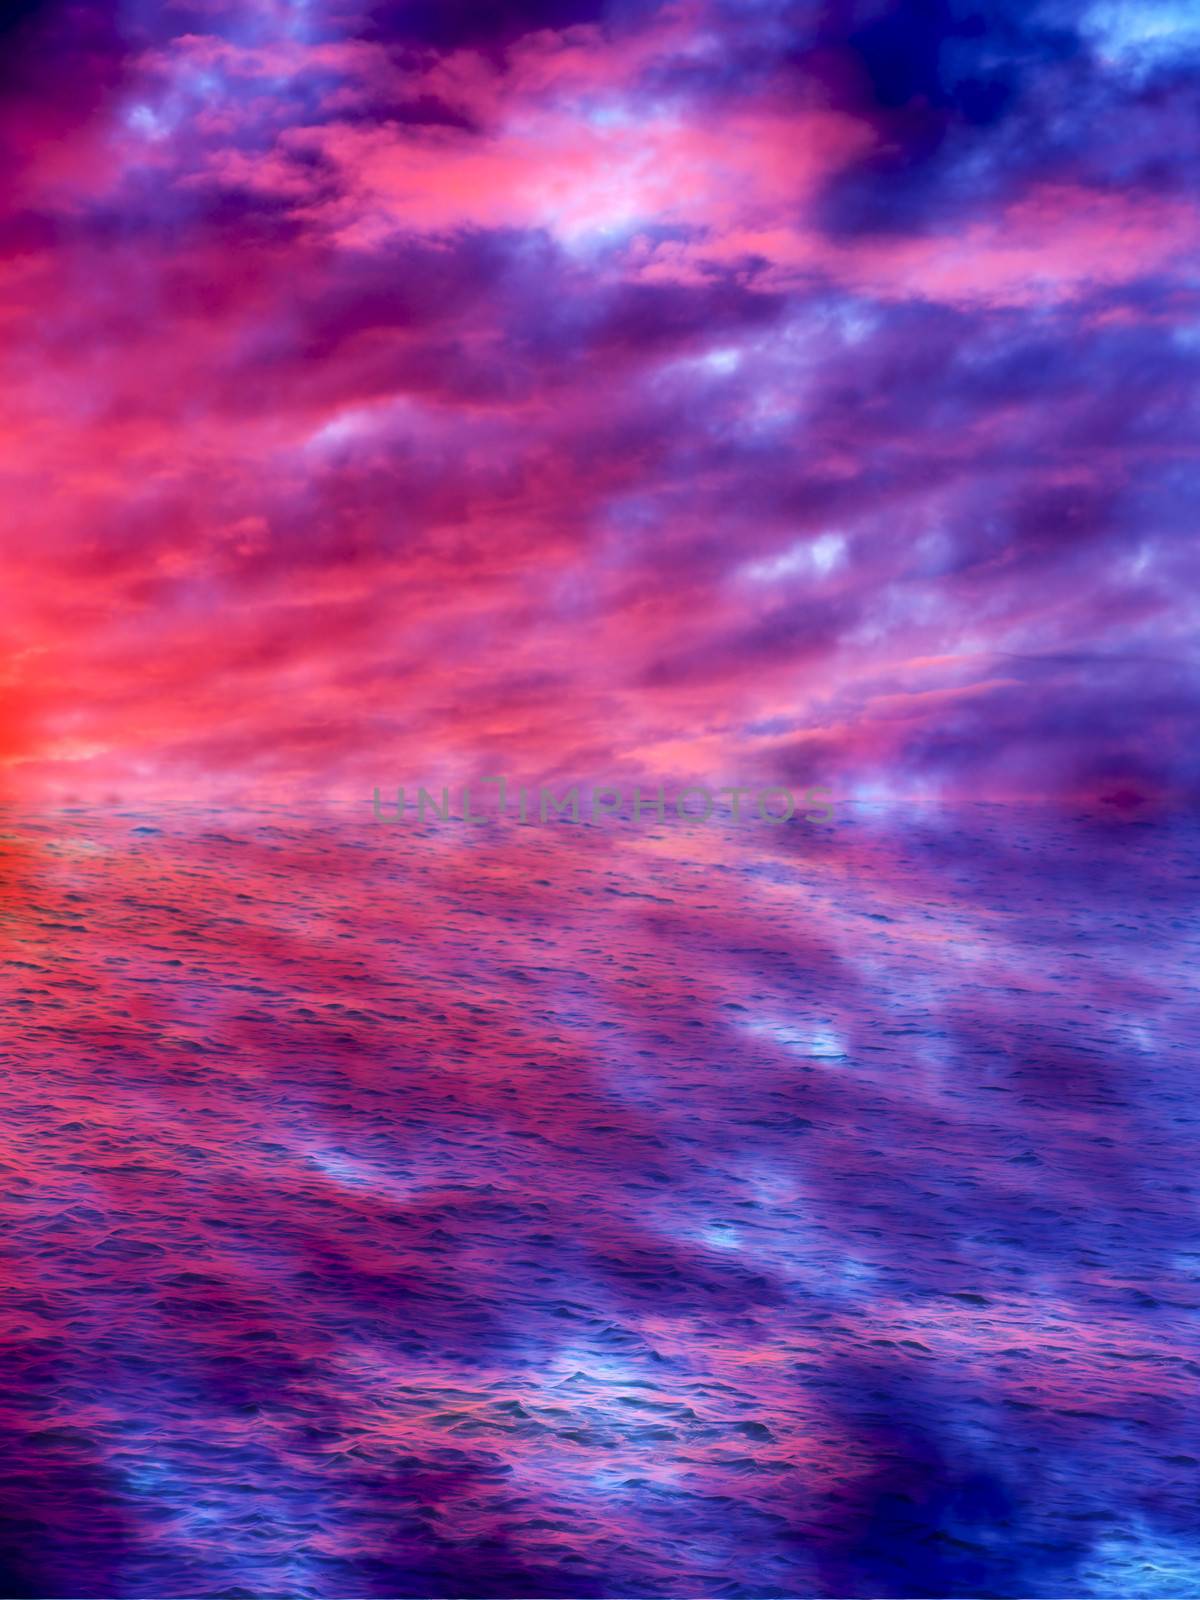 Pink and purple sky over water by Mirage3